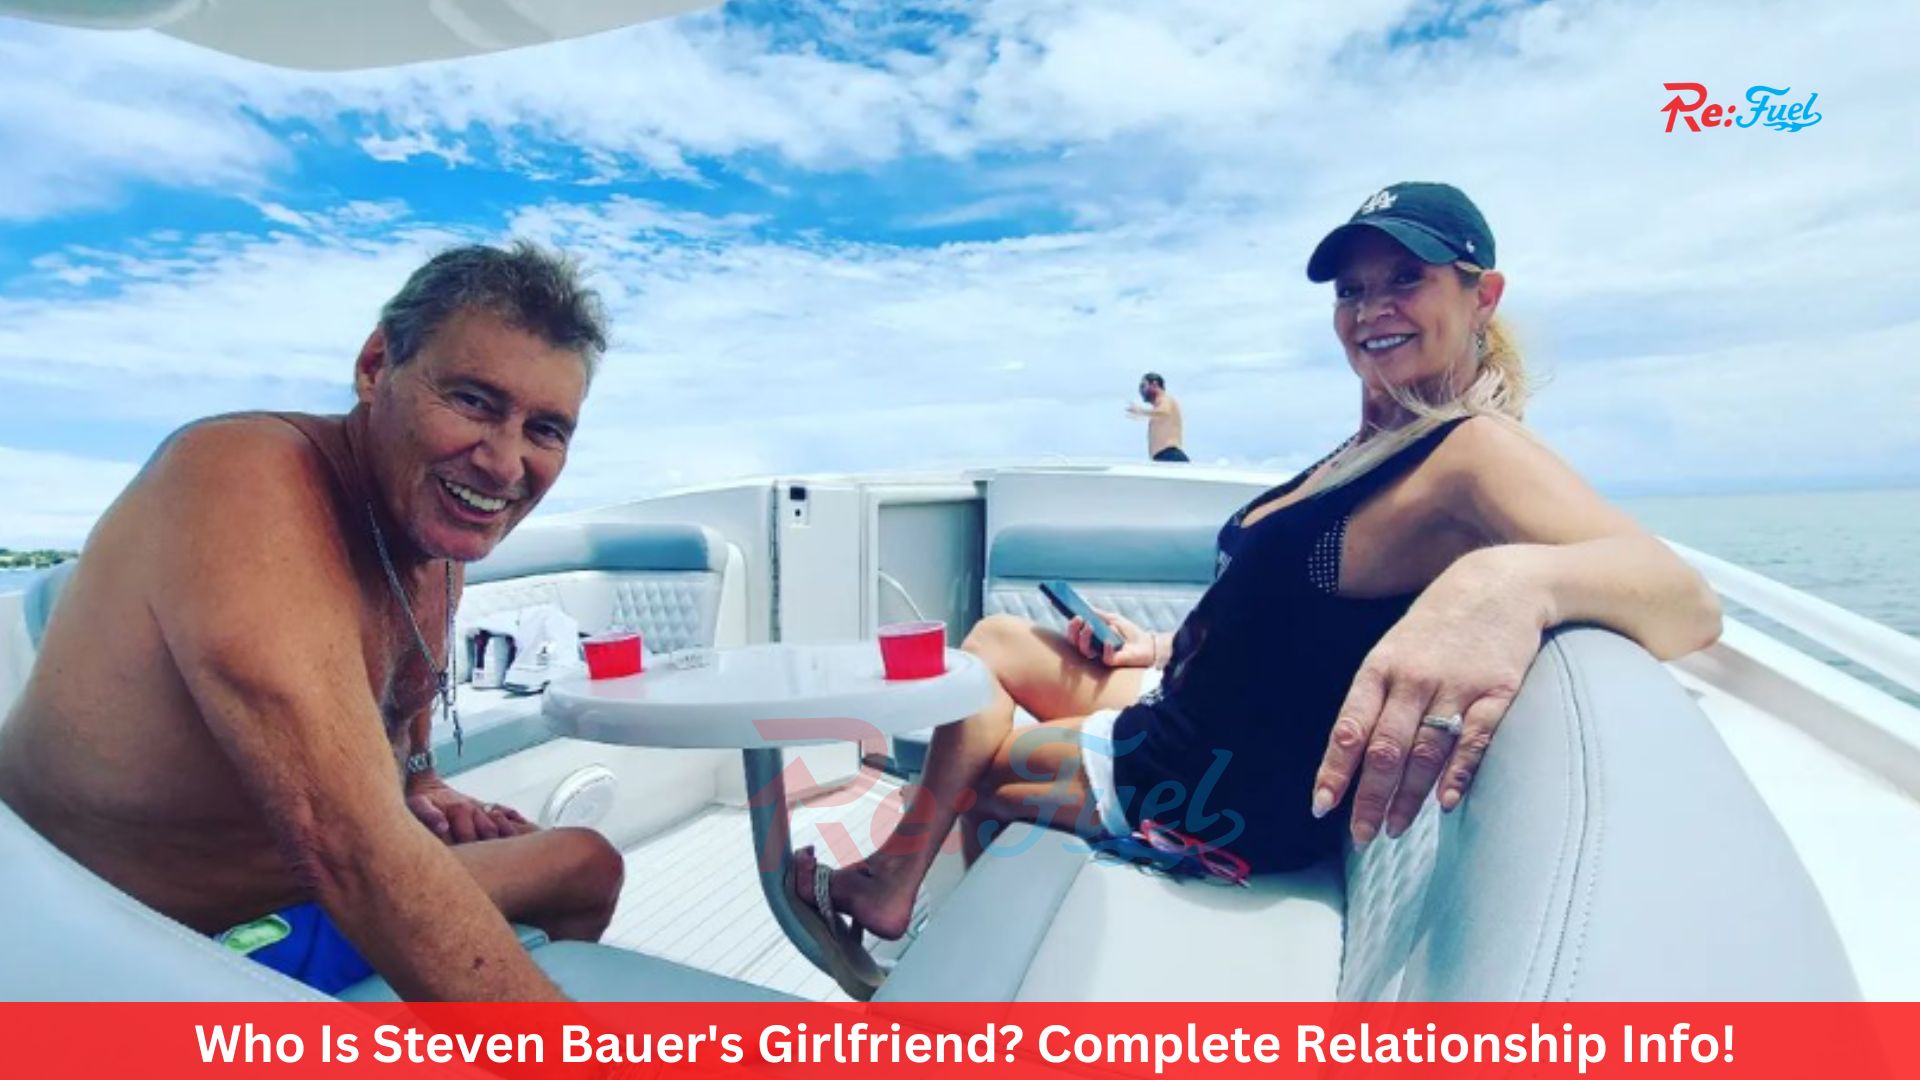 Who Is Steven Bauer's Girlfriend? Complete Relationship Info!